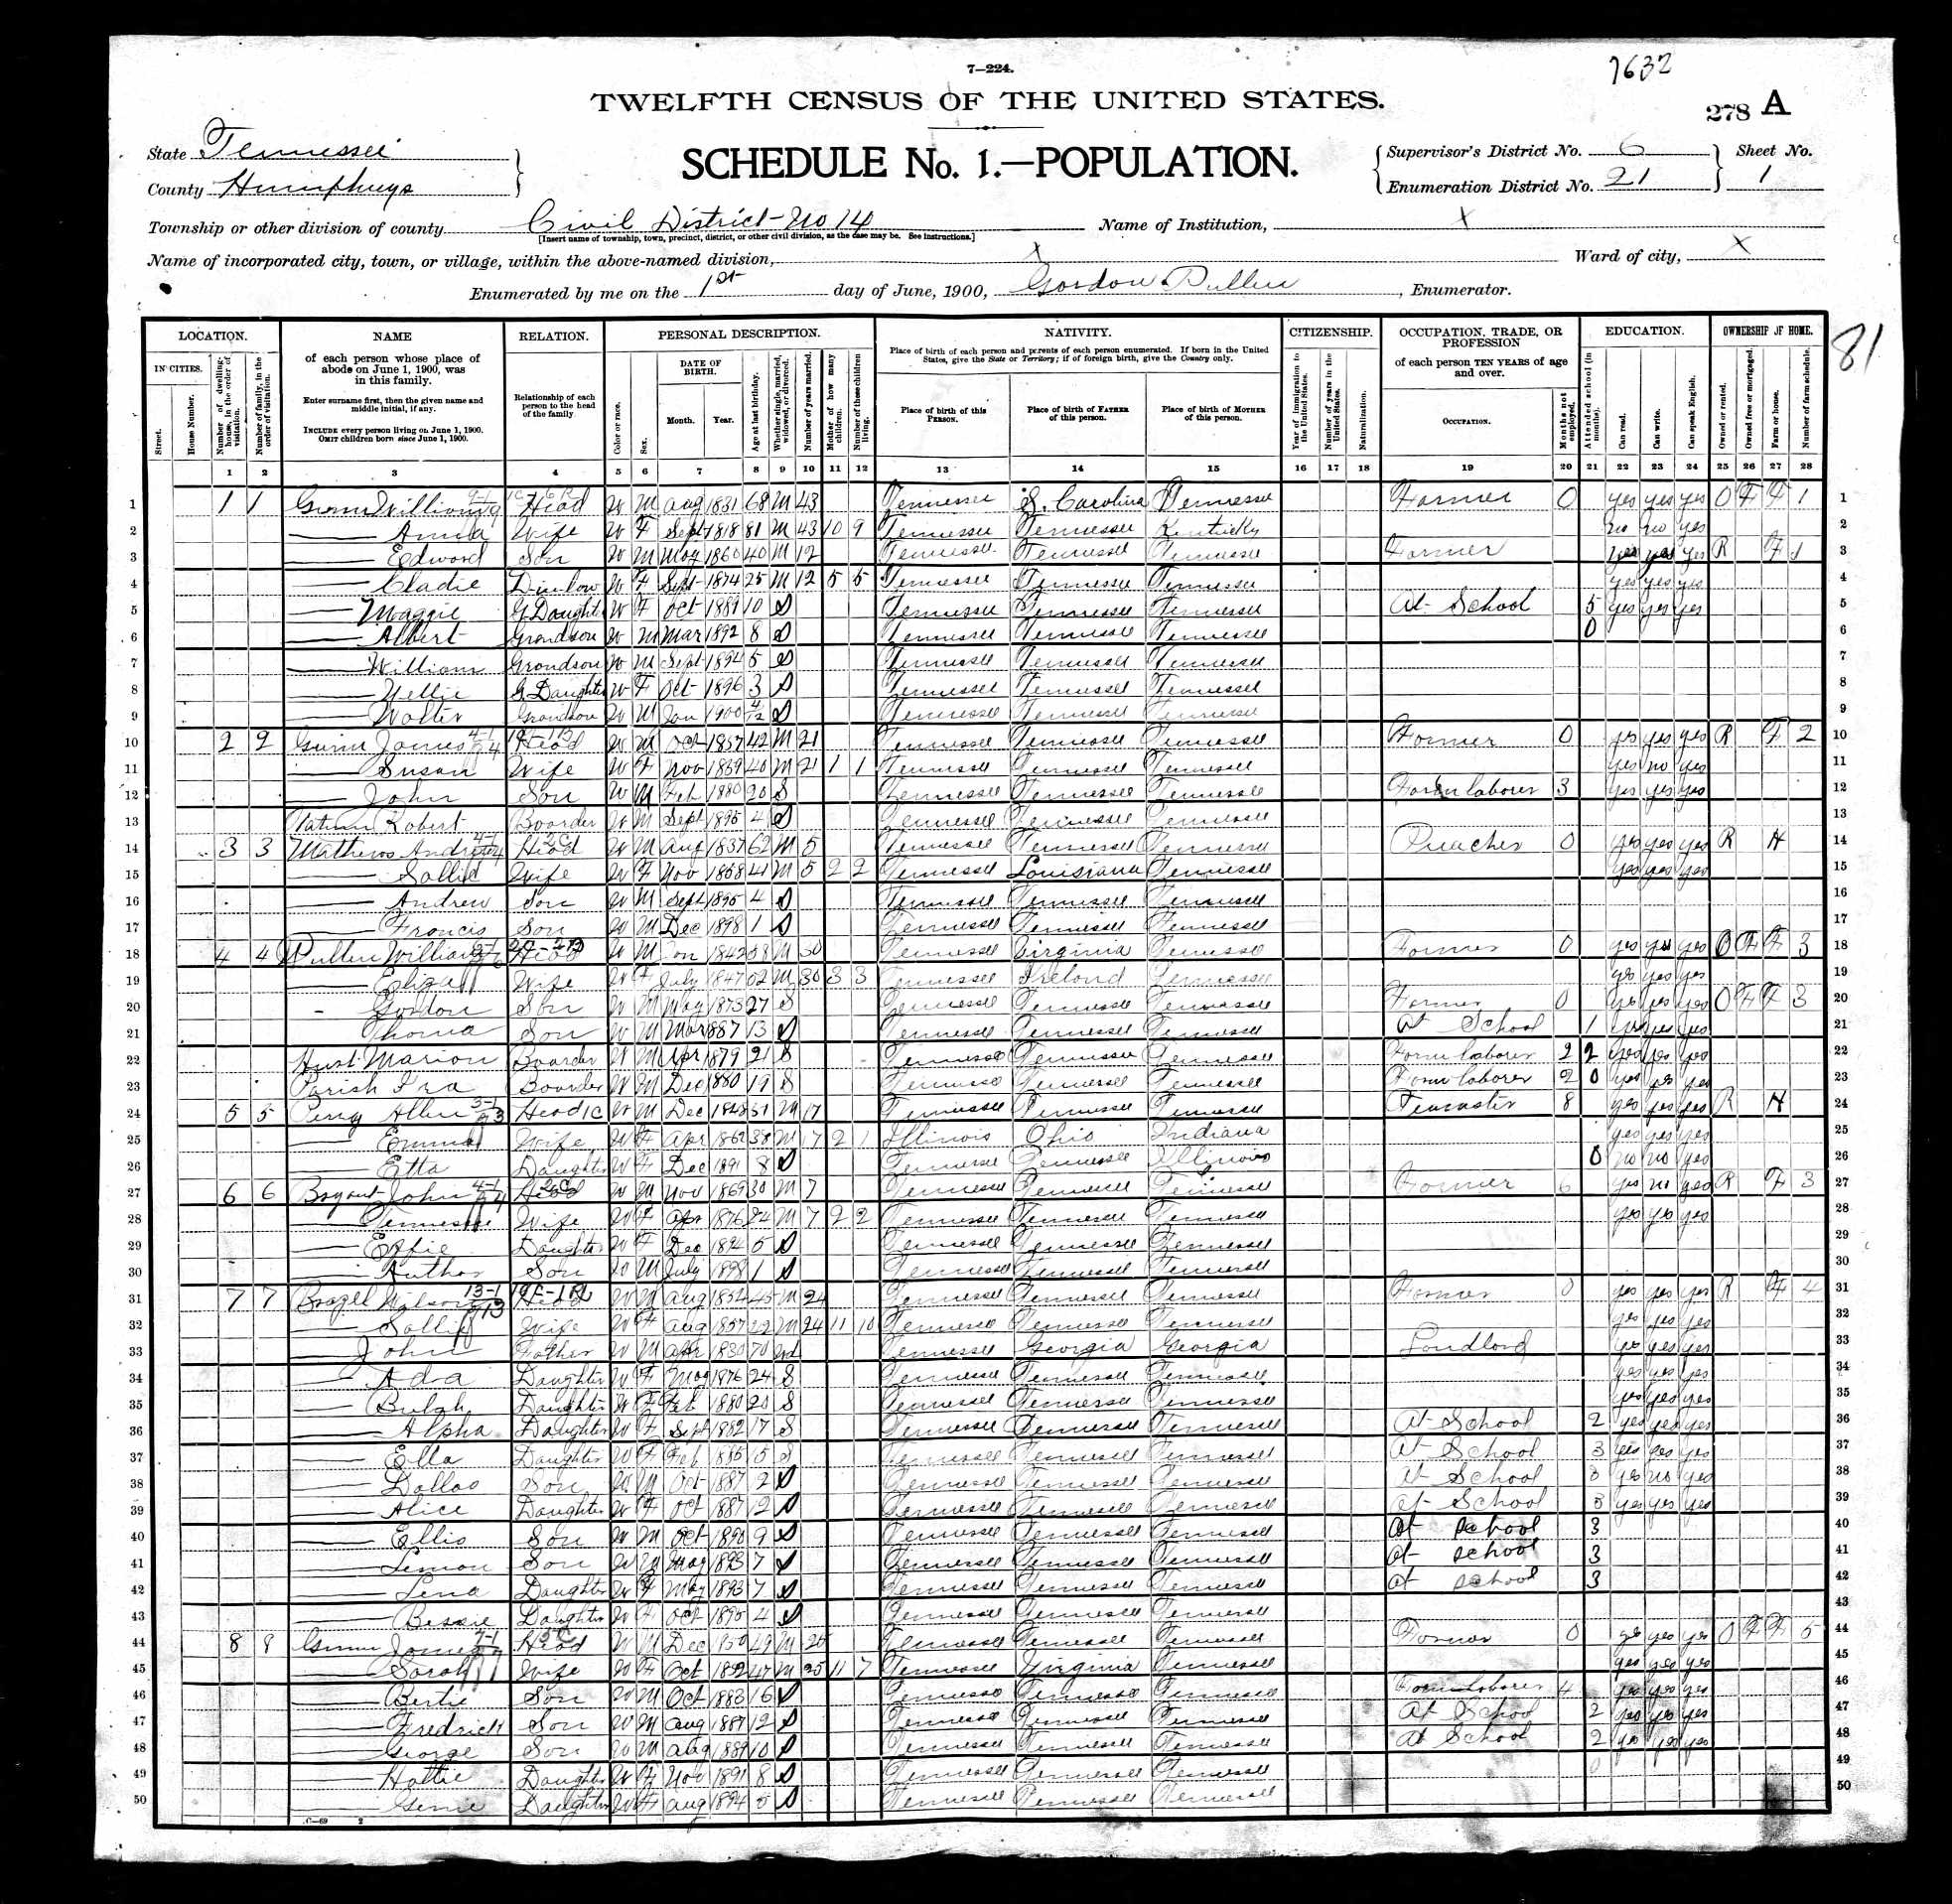 John Brazzell, 1900 Humphreys County, Tennessee, census; in the home of his son, Wilson Brazzell.